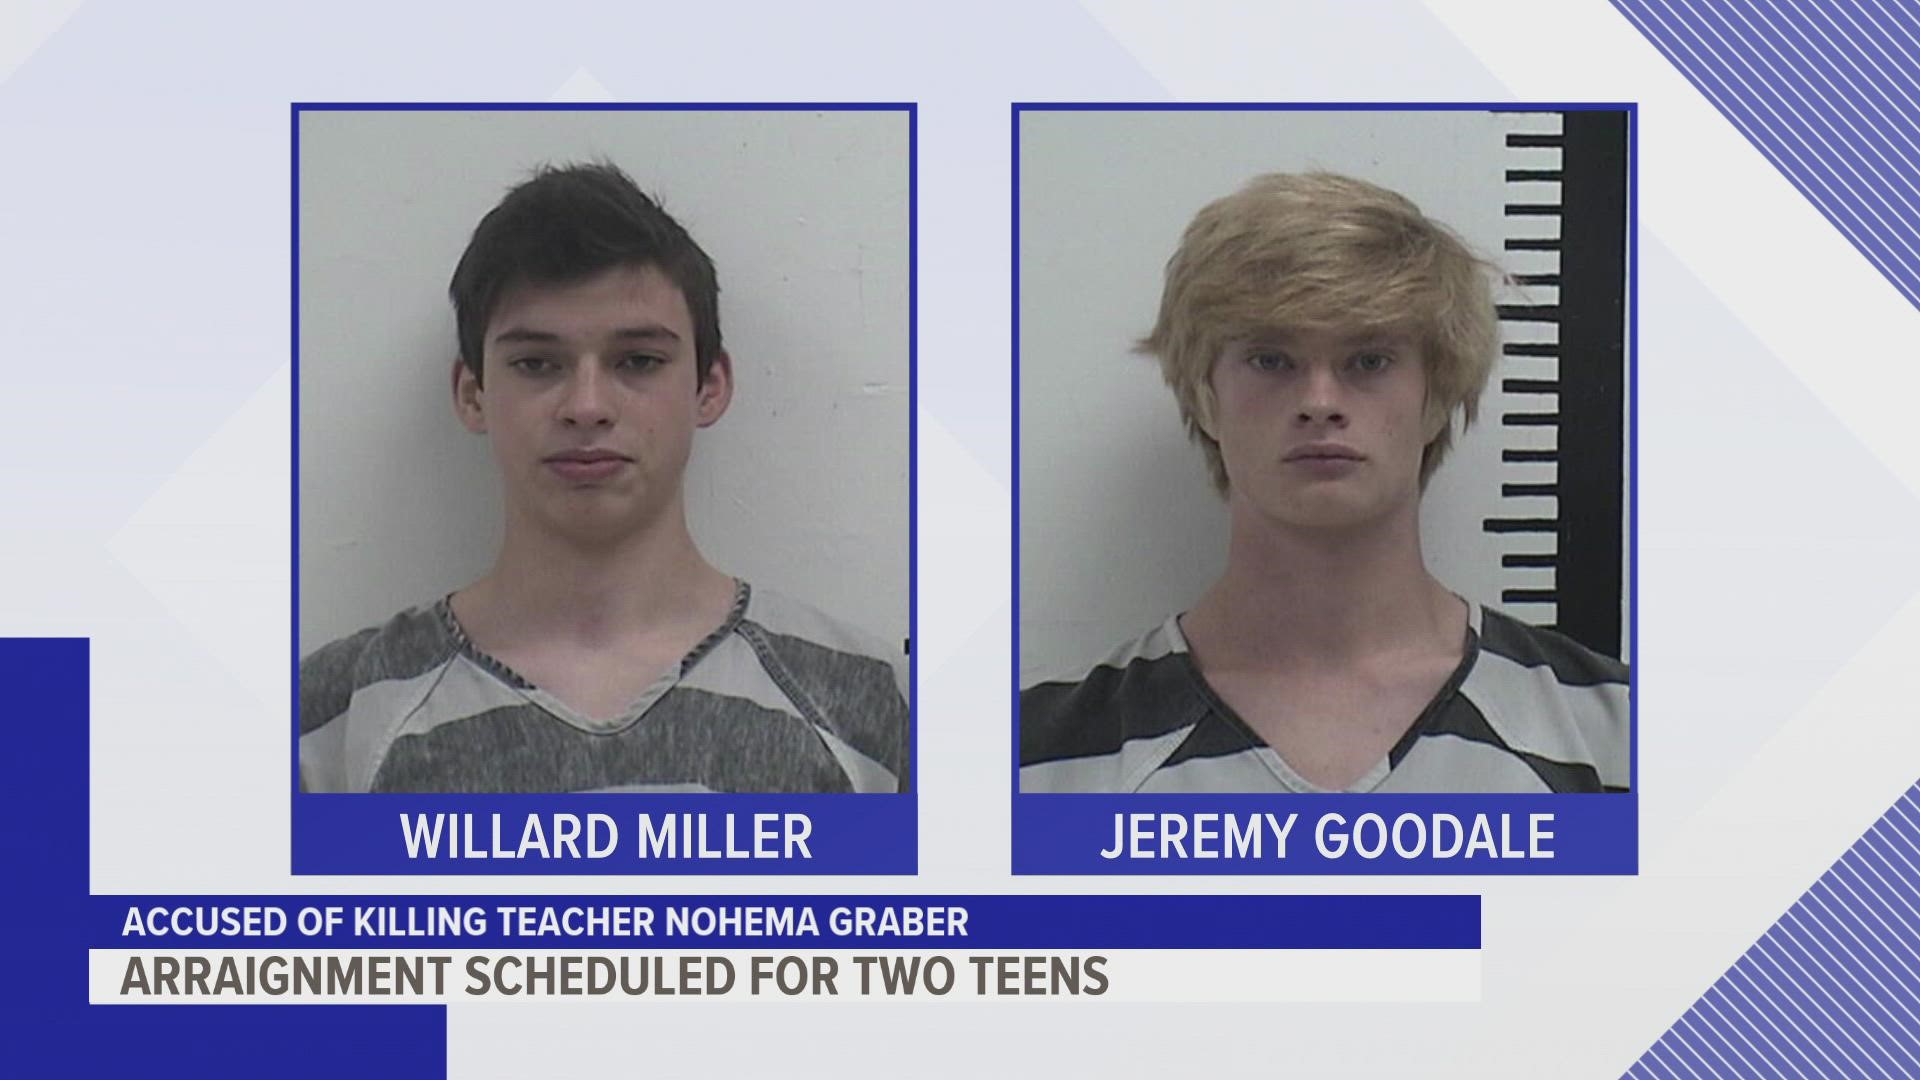 16-year-olds Willard Miller and Jeremy Goodale will remain in jail on $1 million cash-only bonds.